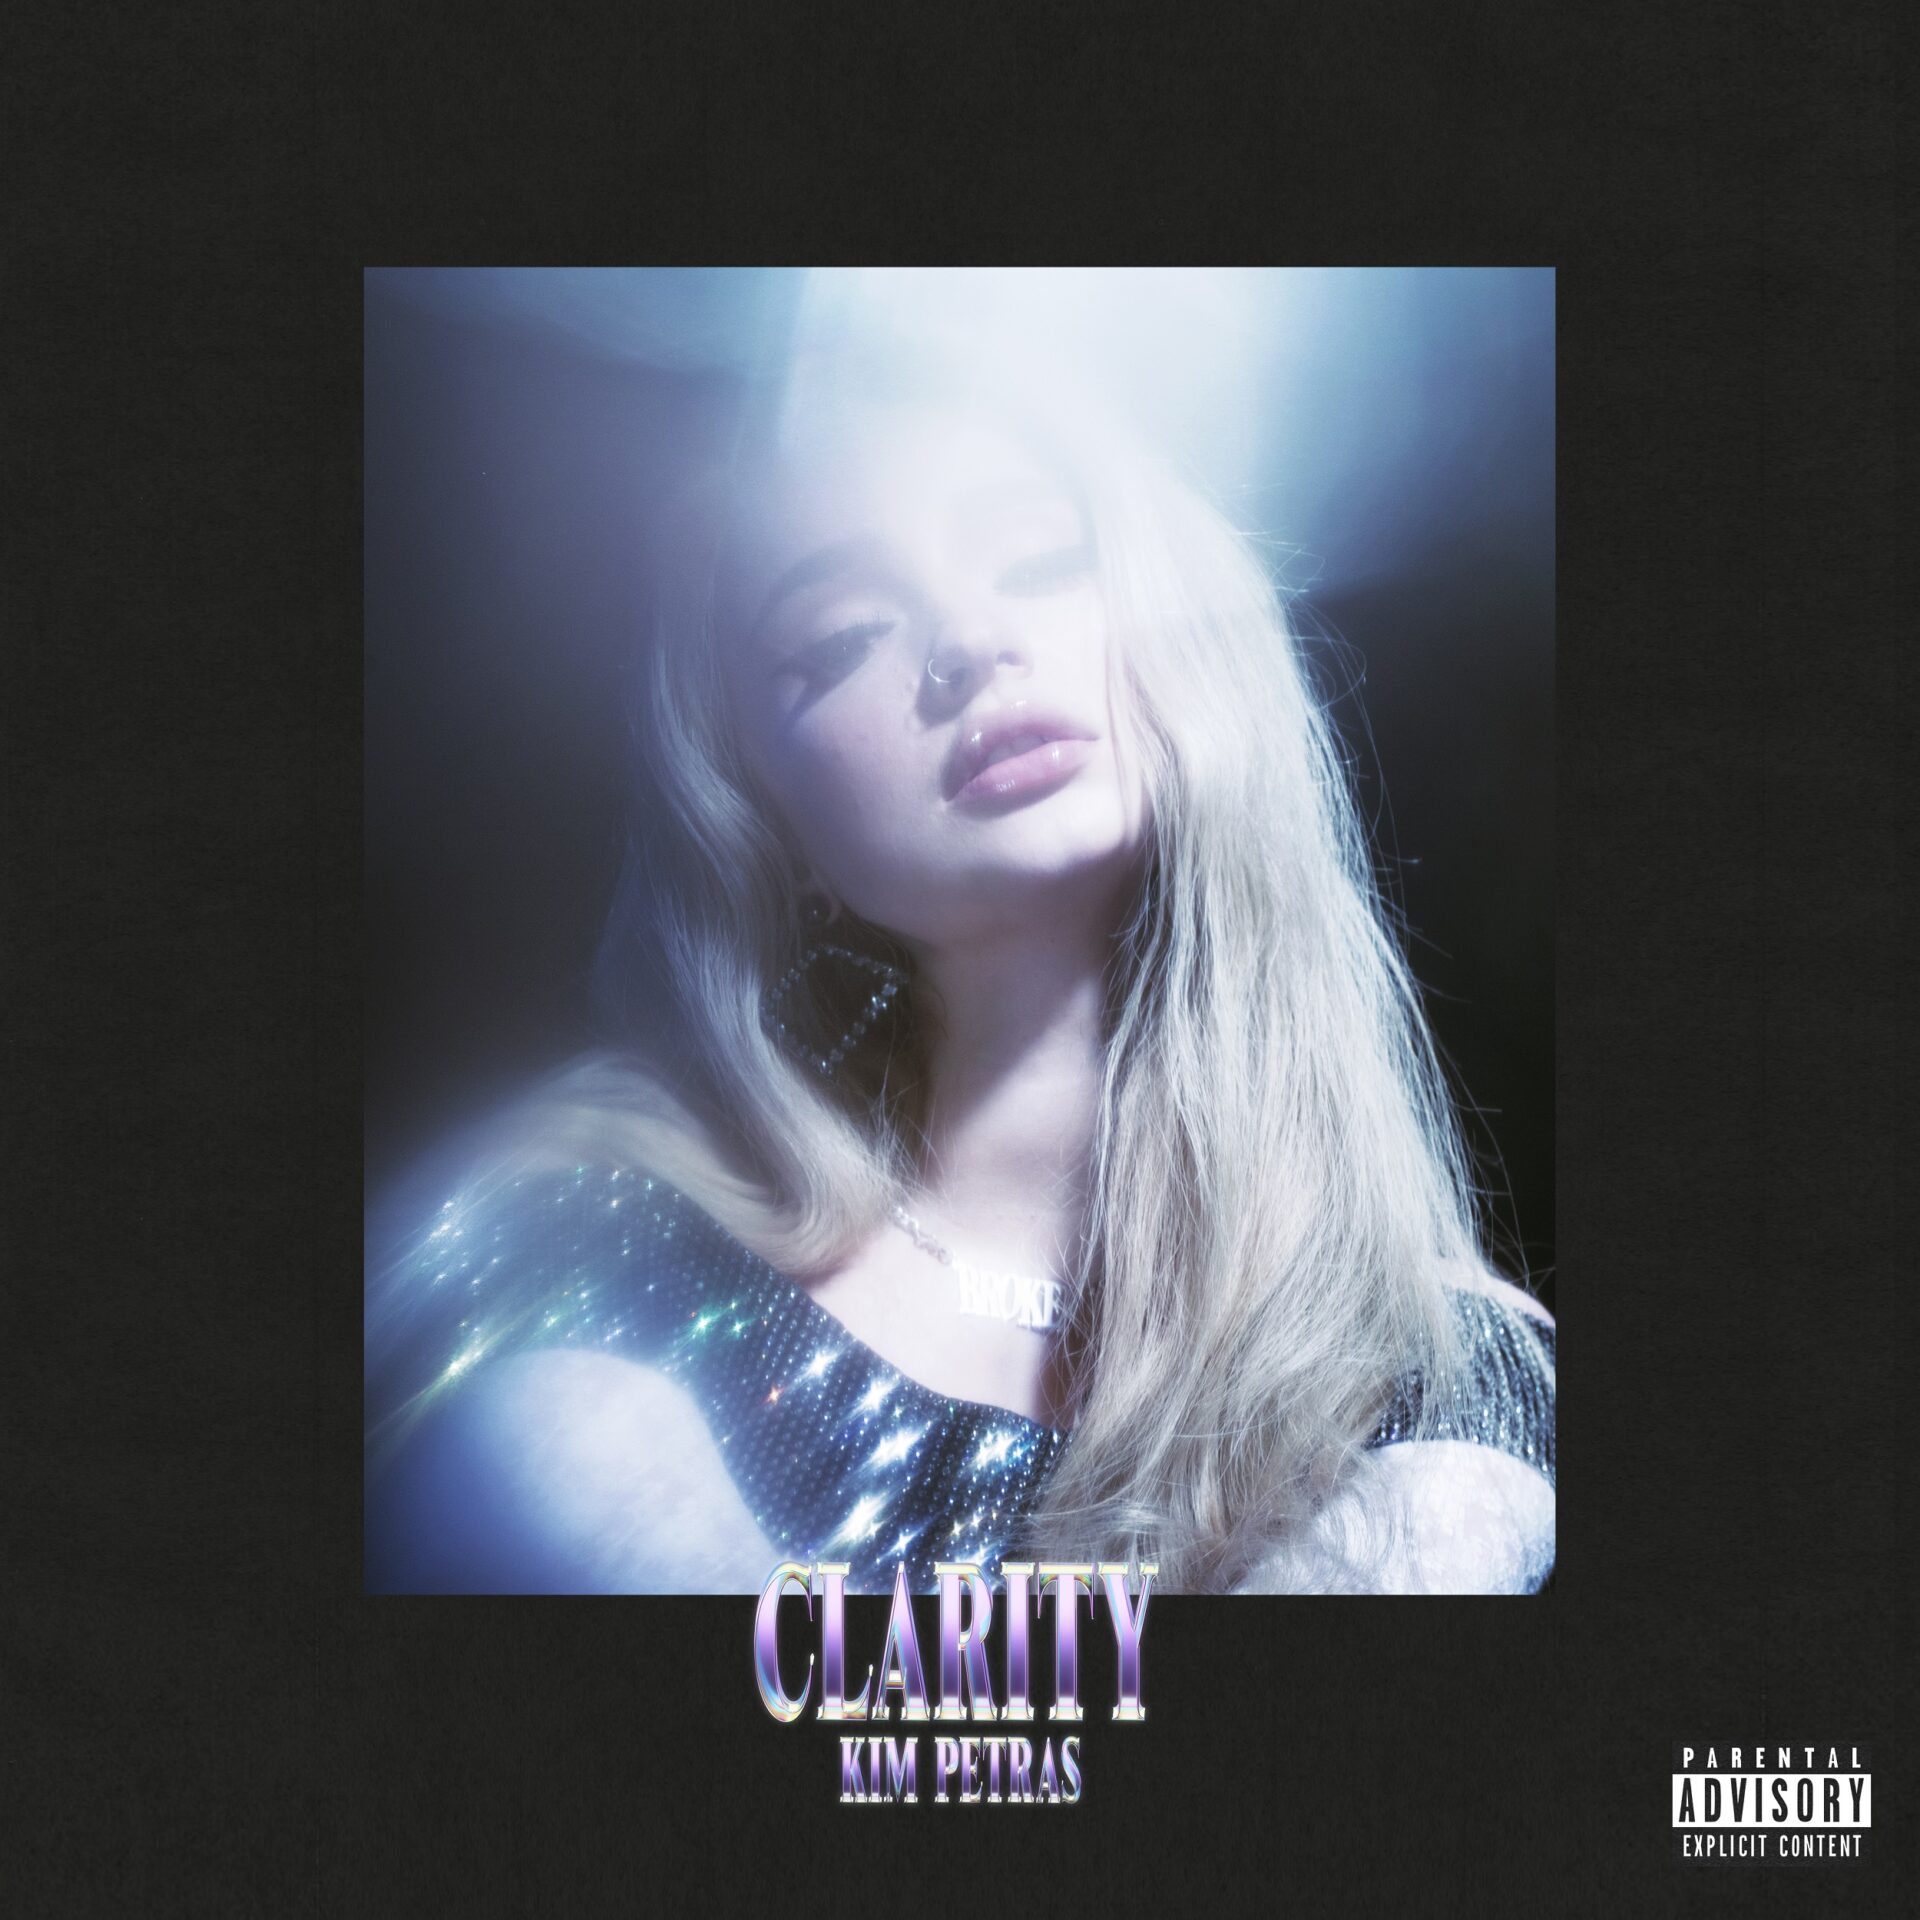 REVIEW: Kim Petras finds “Clarity” on new project